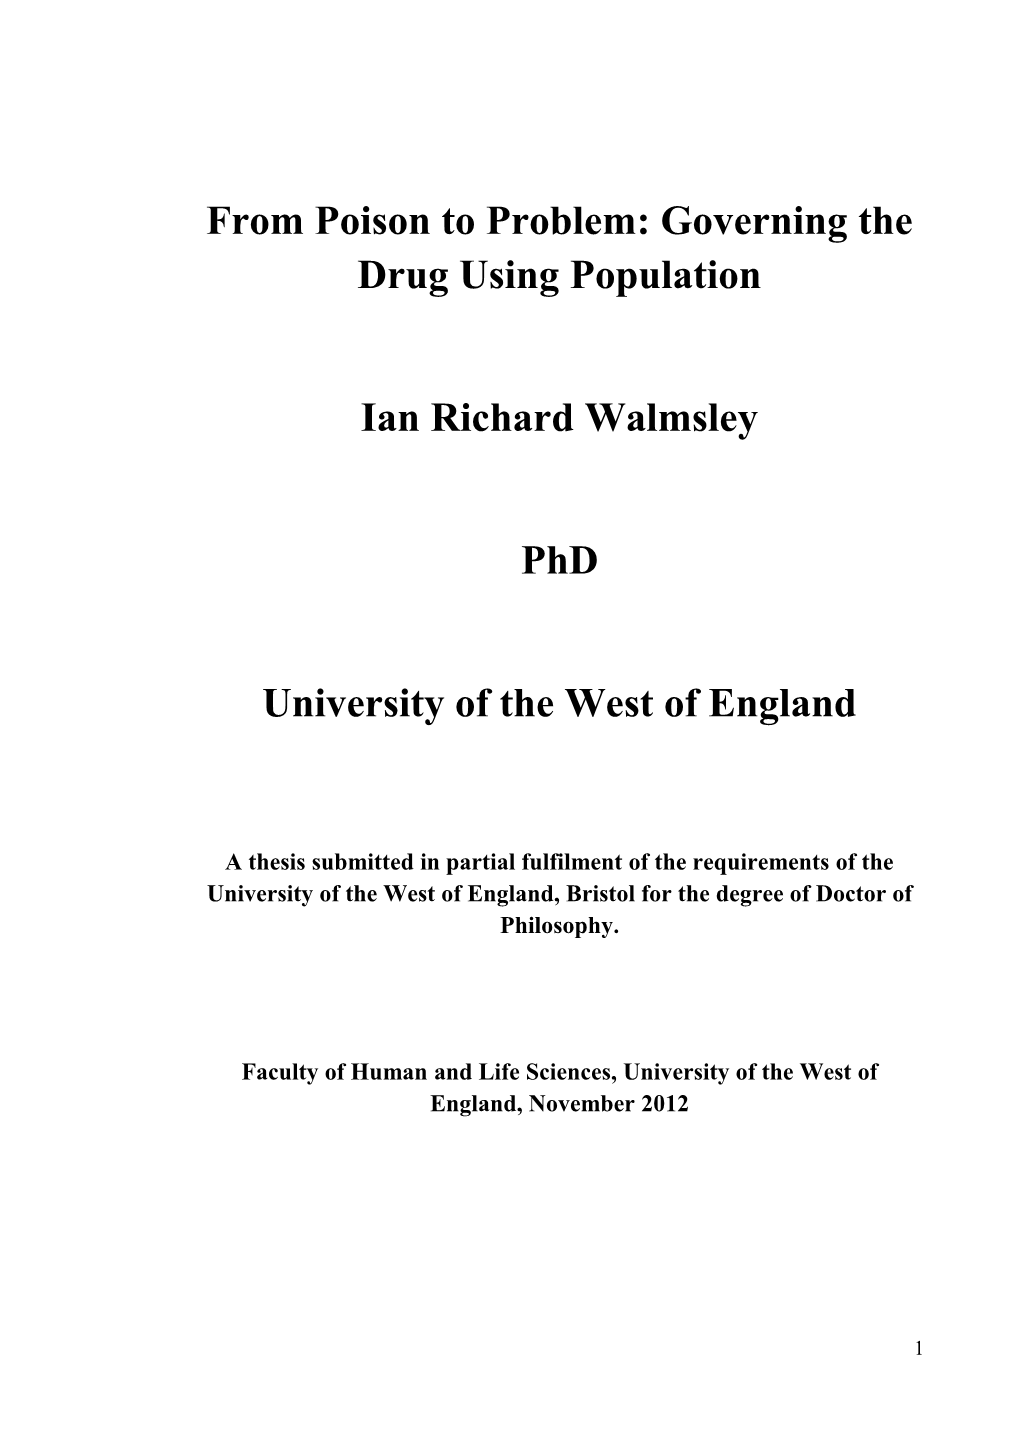 From Poison to Problem: Governing the Drug Using Population